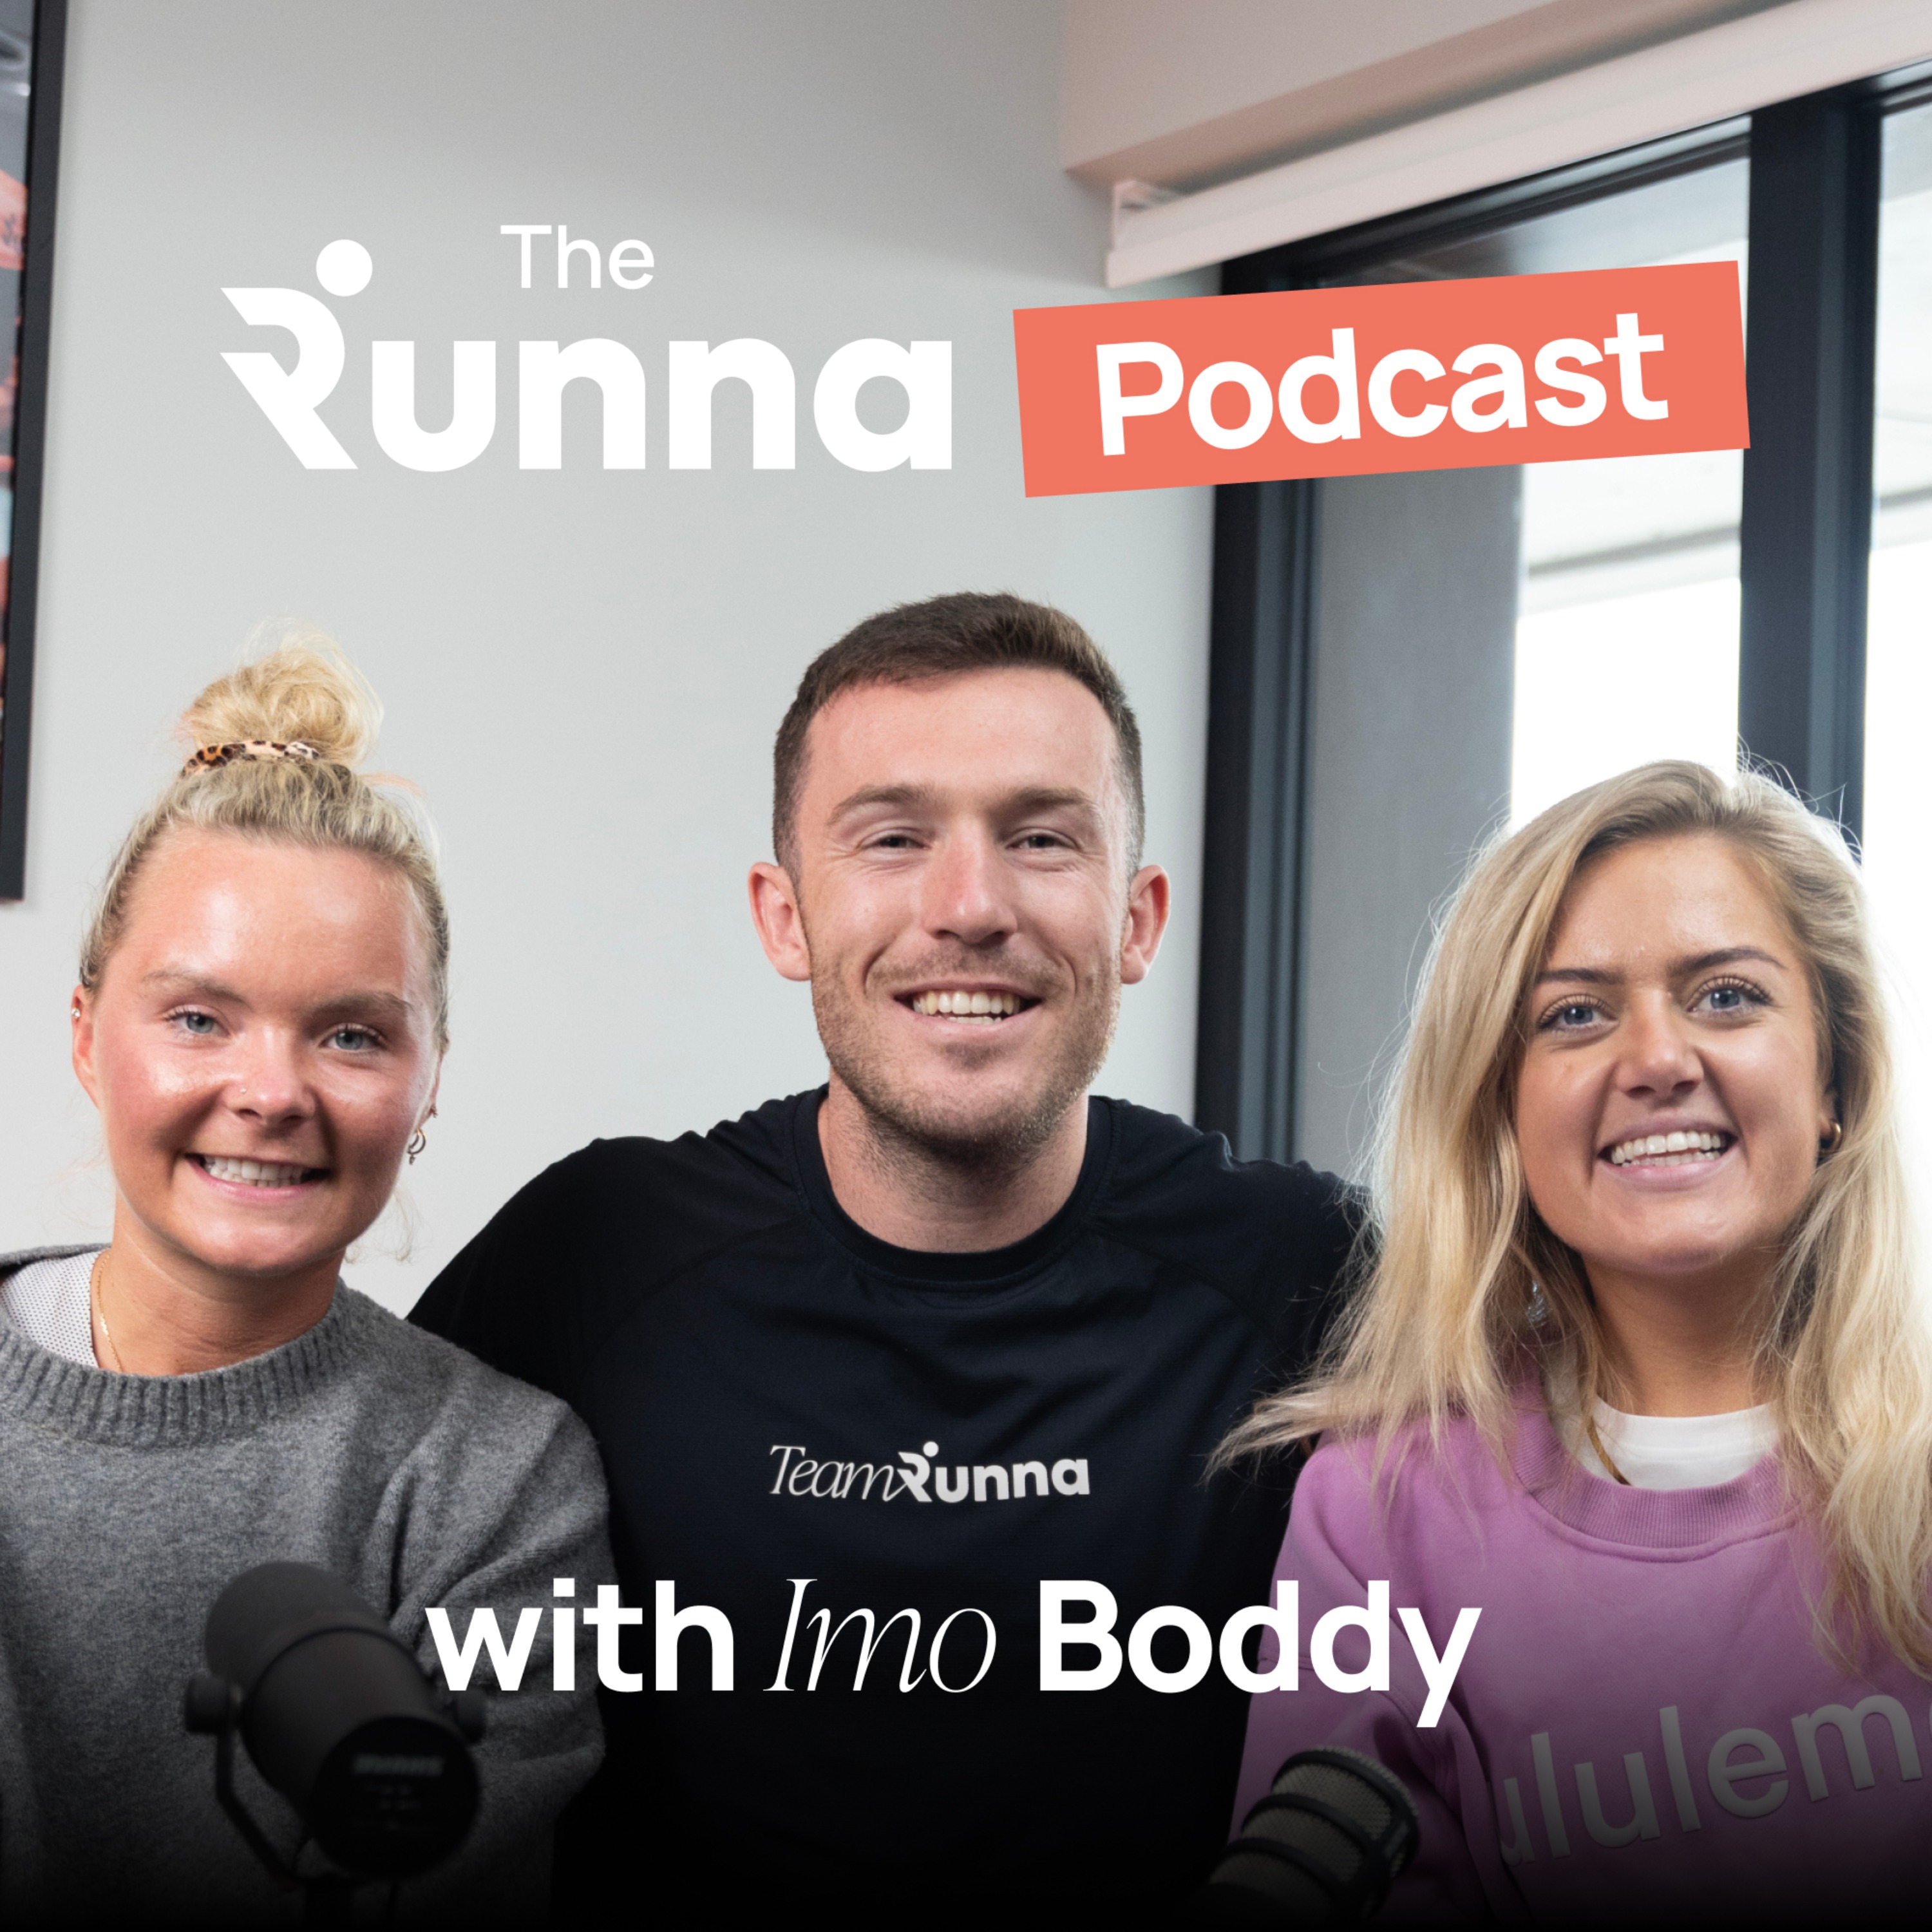 Imo Boddy: Episode 6 - An Inspirational Ultra Athlete on Her Journey to a Second World Record